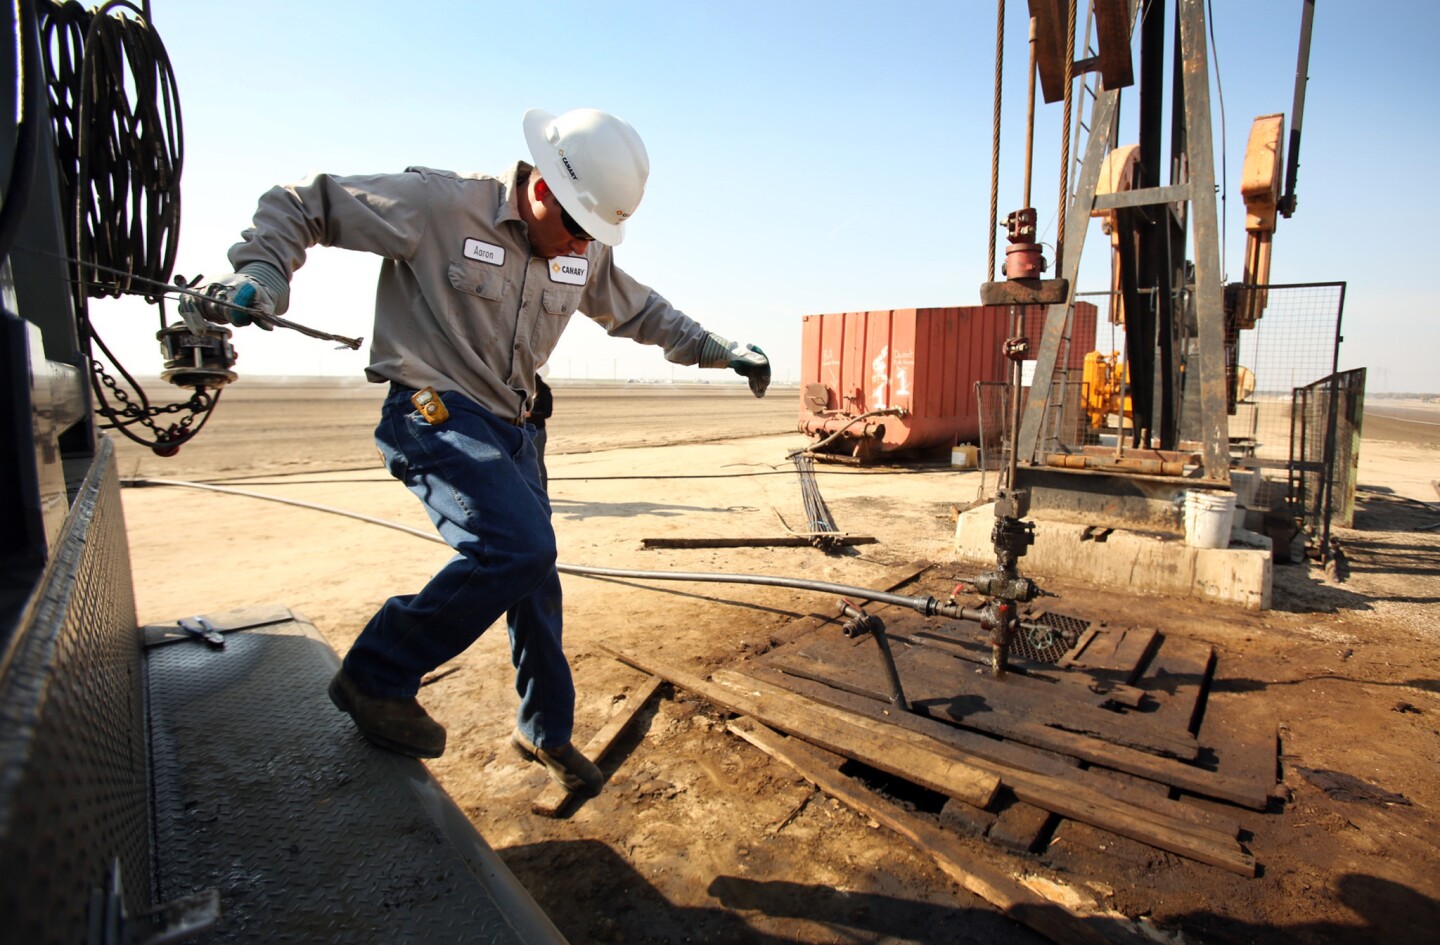 Aaron Kent, an employee of oil services firm Canary, works at an oil rig pump jack near Bakersfield in March 2013. Some 12,000 people are on oil and gas extraction and well-drilling payrolls in the area.